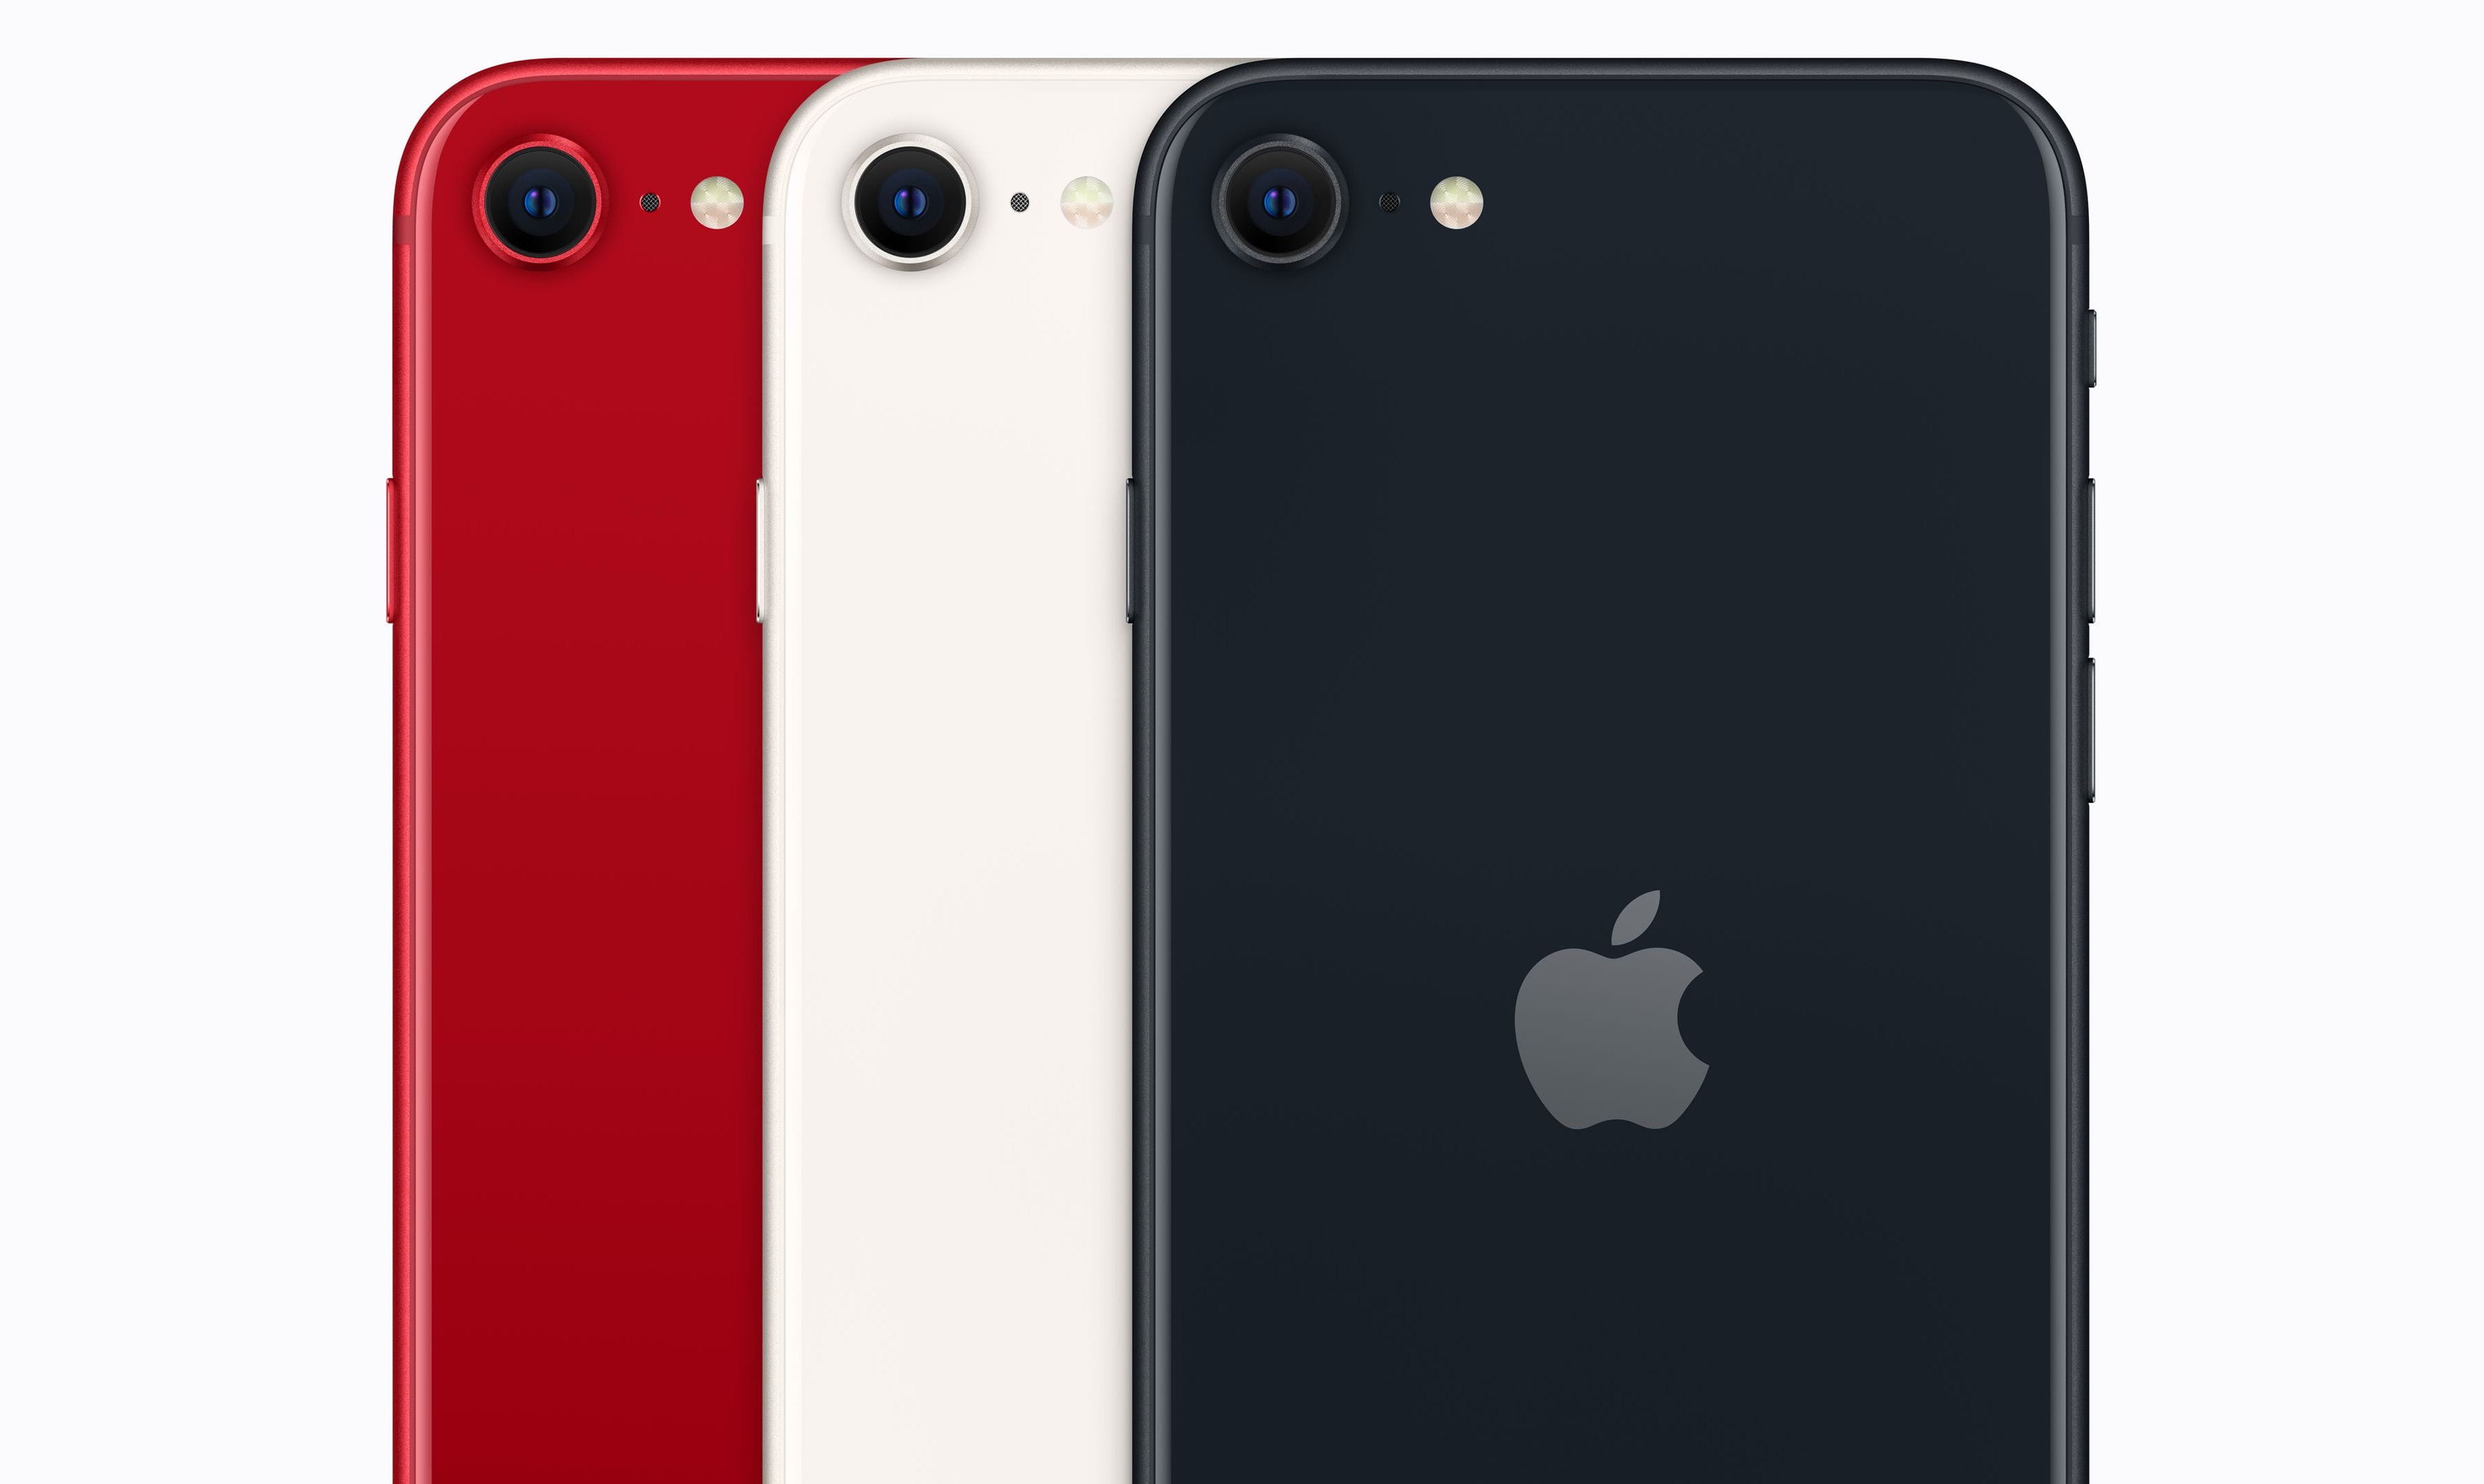 iPhone SE all colors - red, white, and black